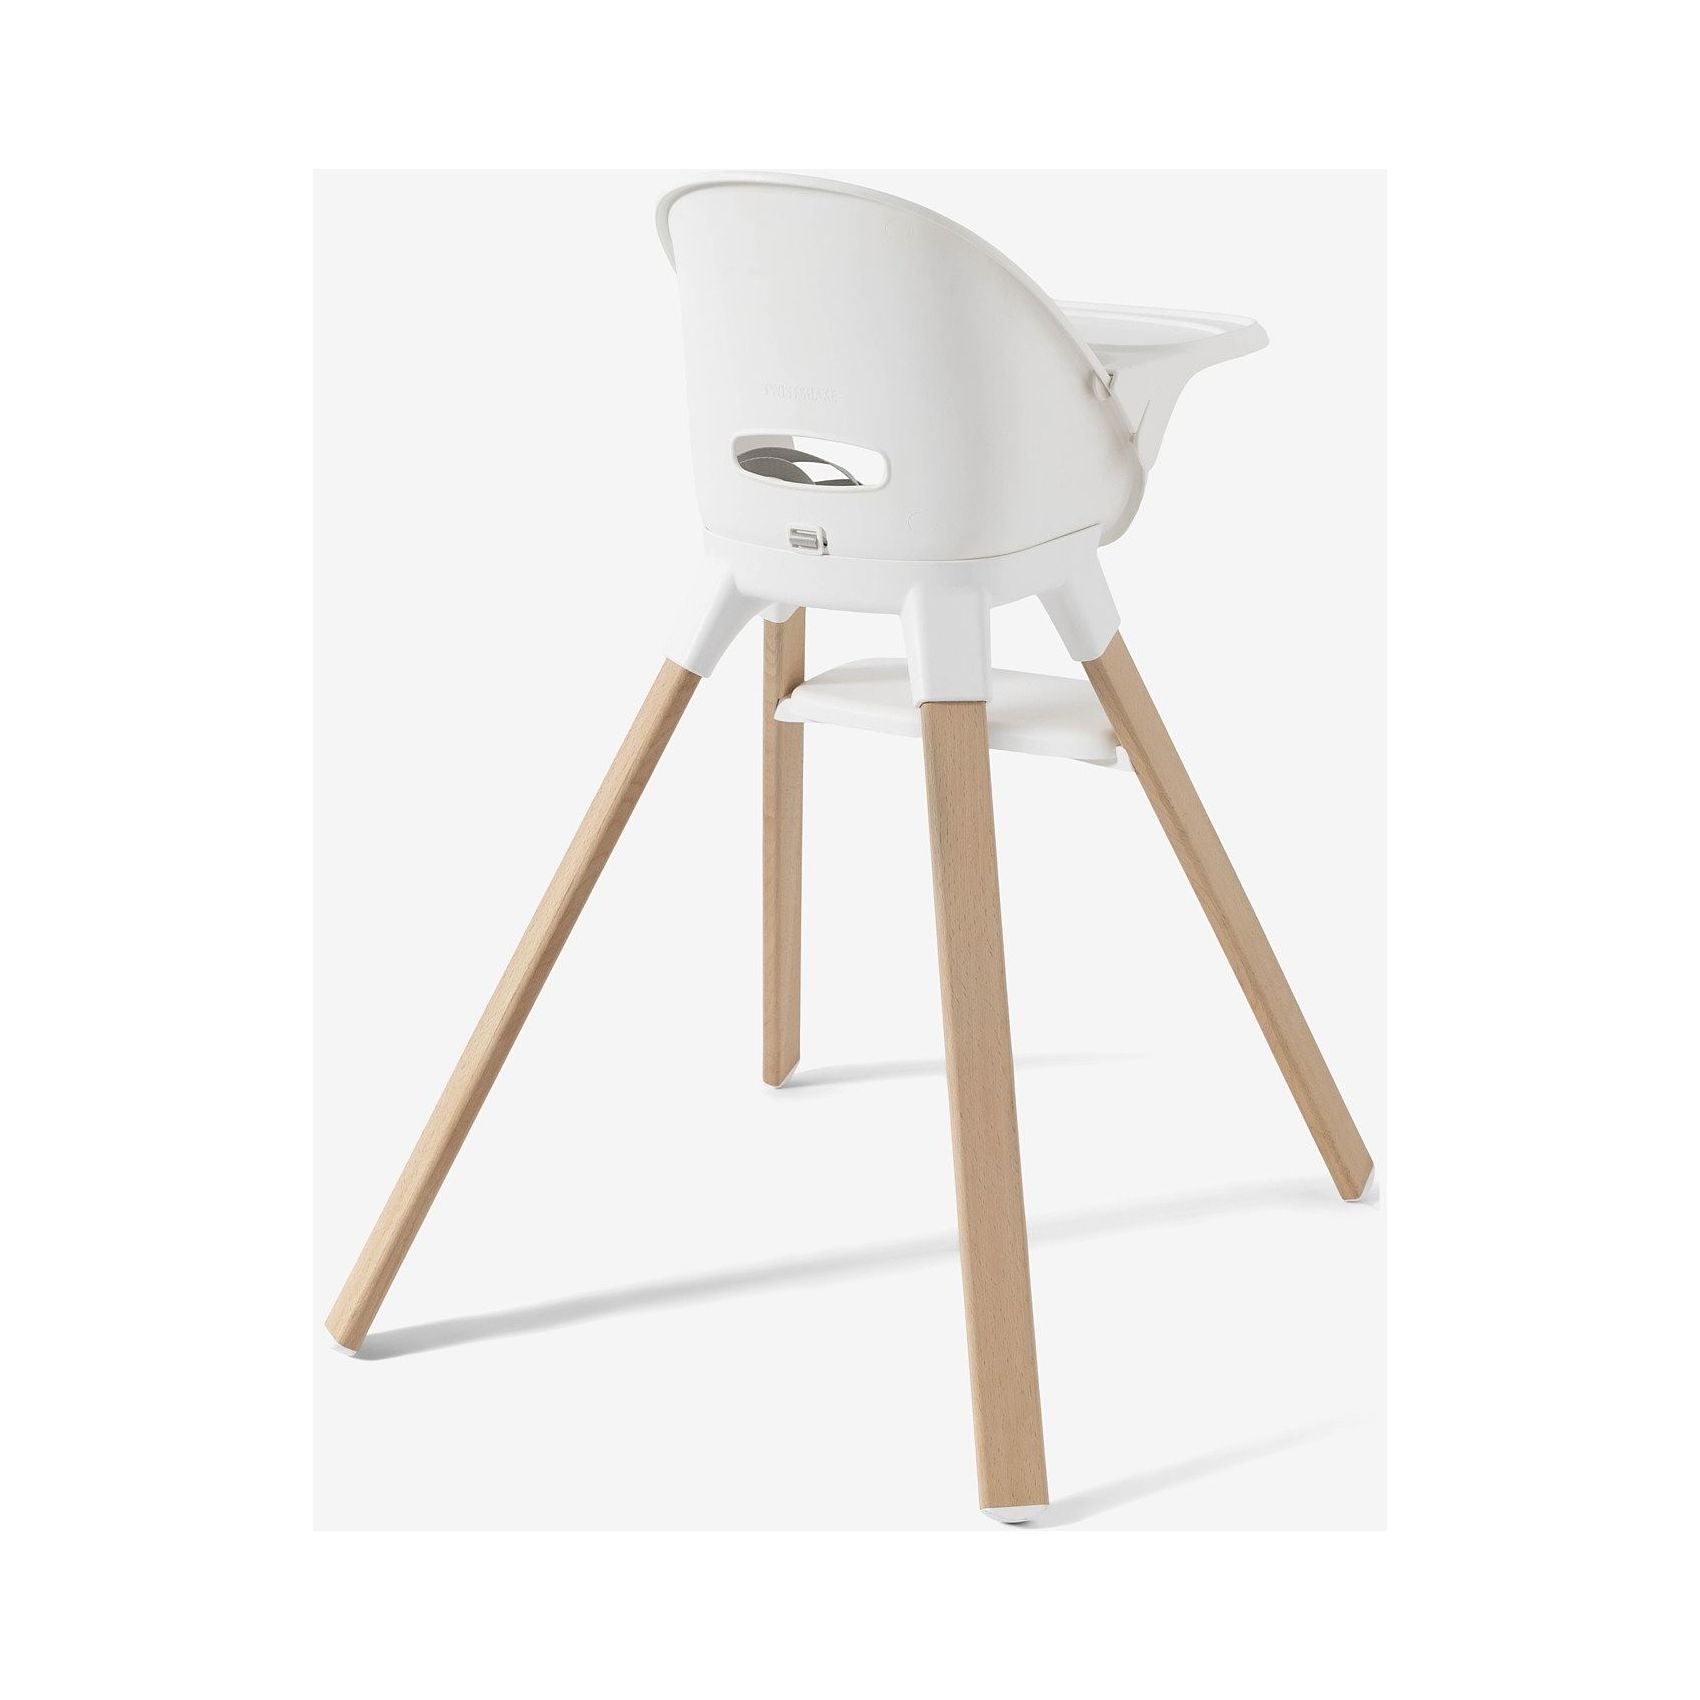 Twistshake Baby Feeding Highchair White Age- 12 Months to 3 Years (Holds upto 15 Kg)